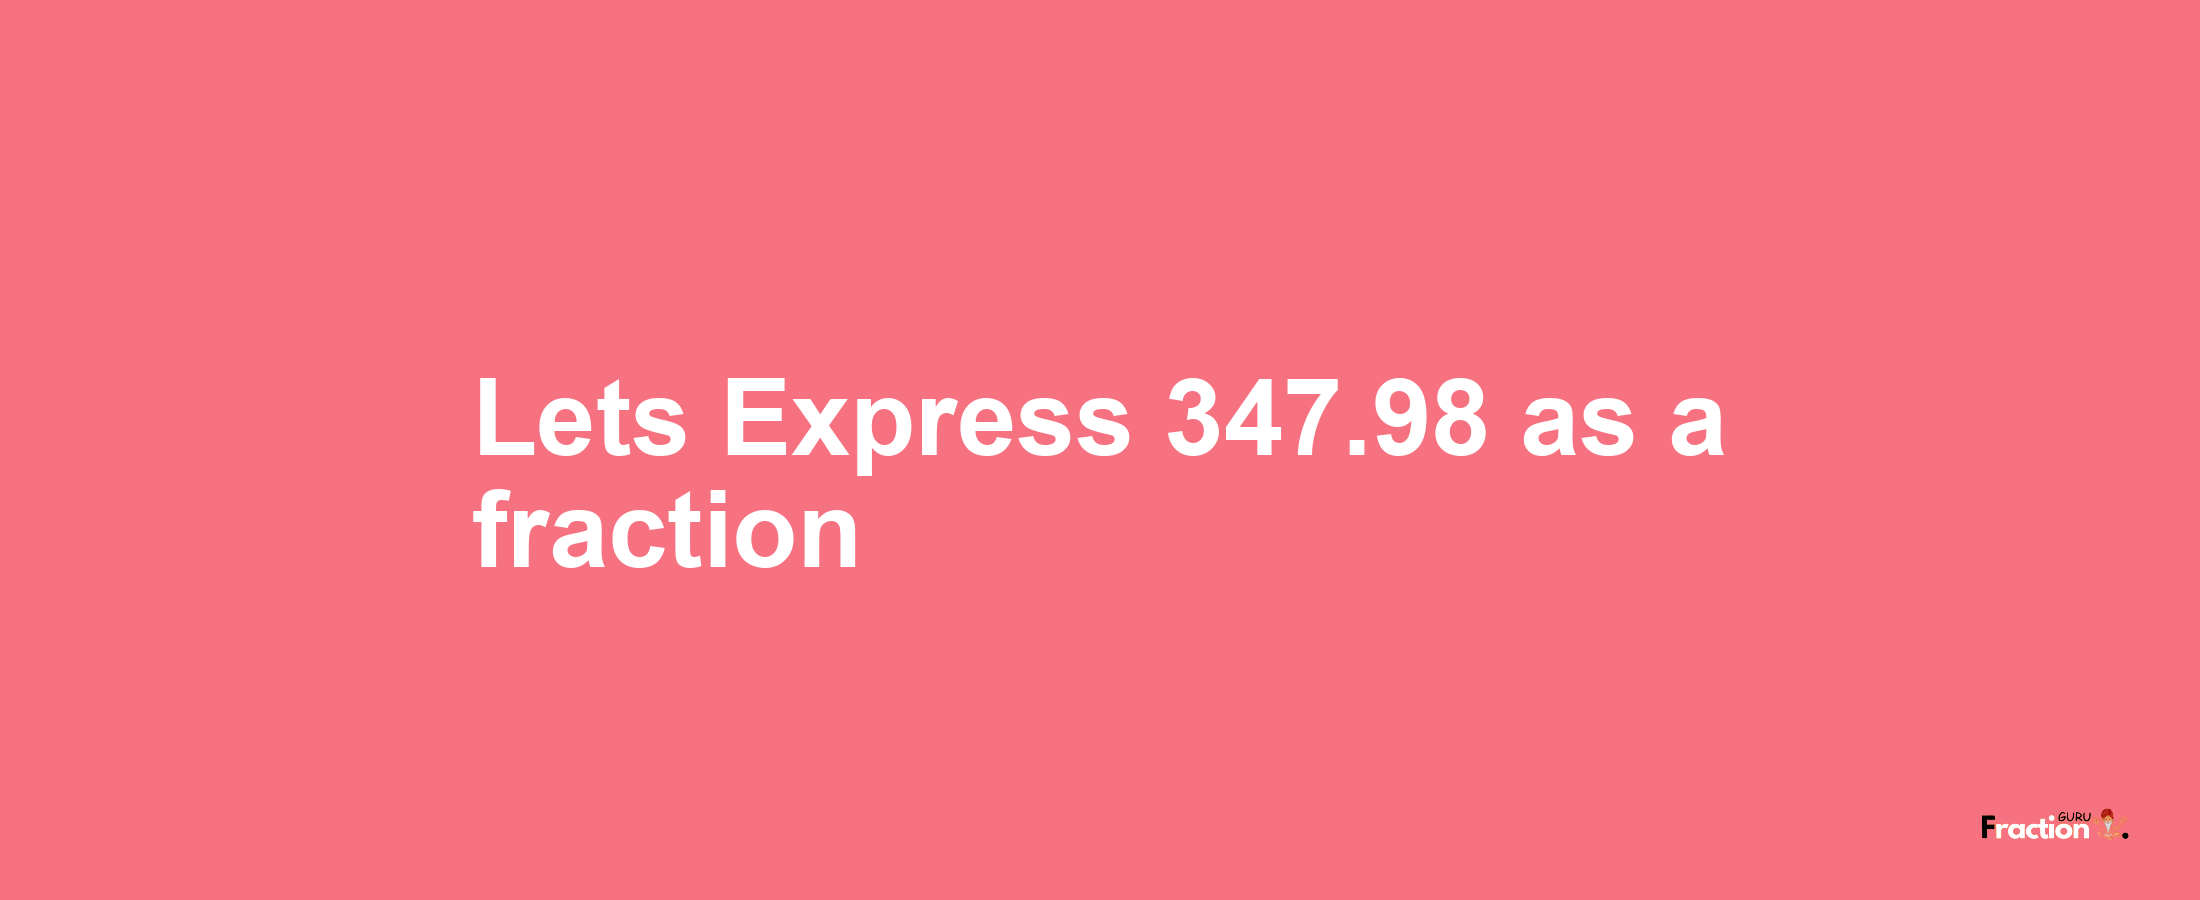 Lets Express 347.98 as afraction